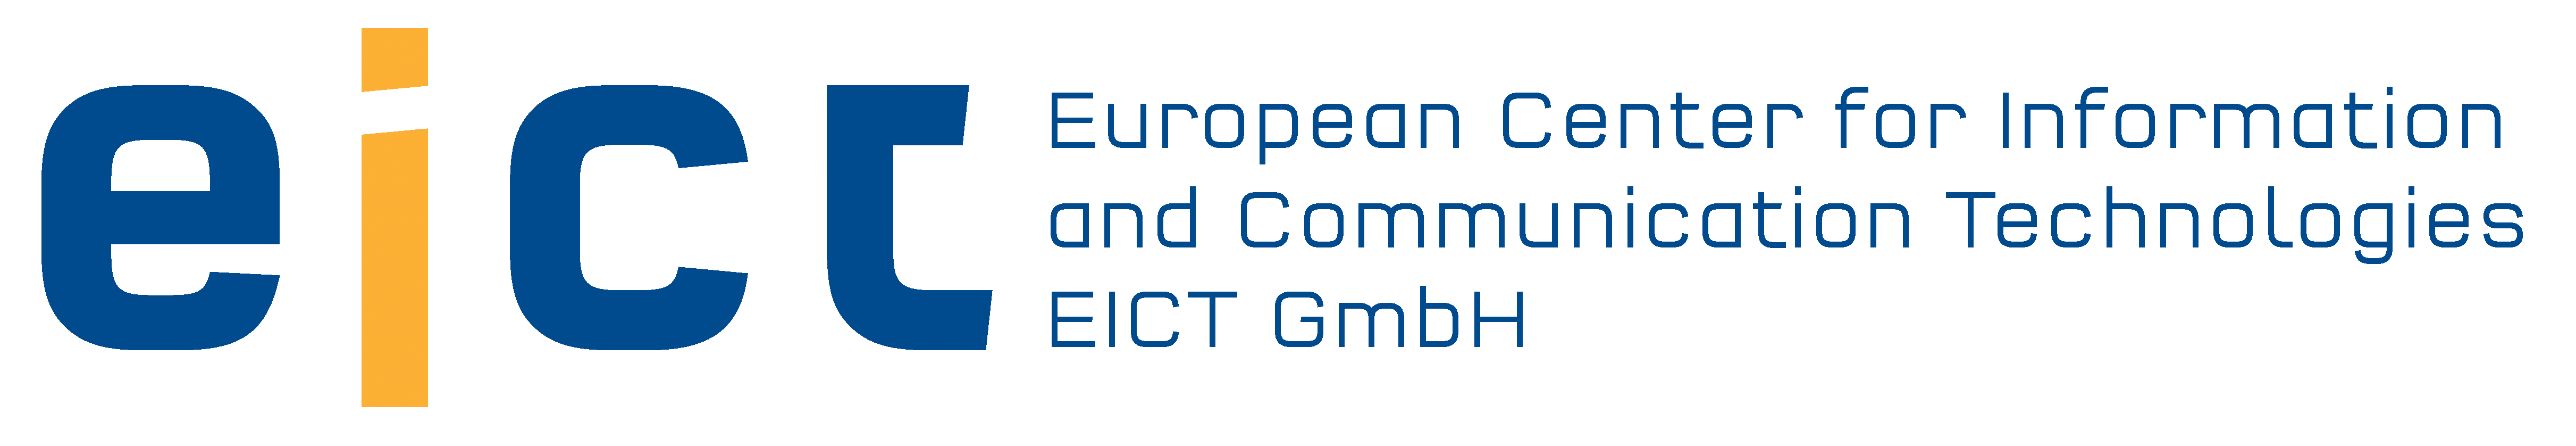 European Center for Information and Communication Technologies - EICT GmbH